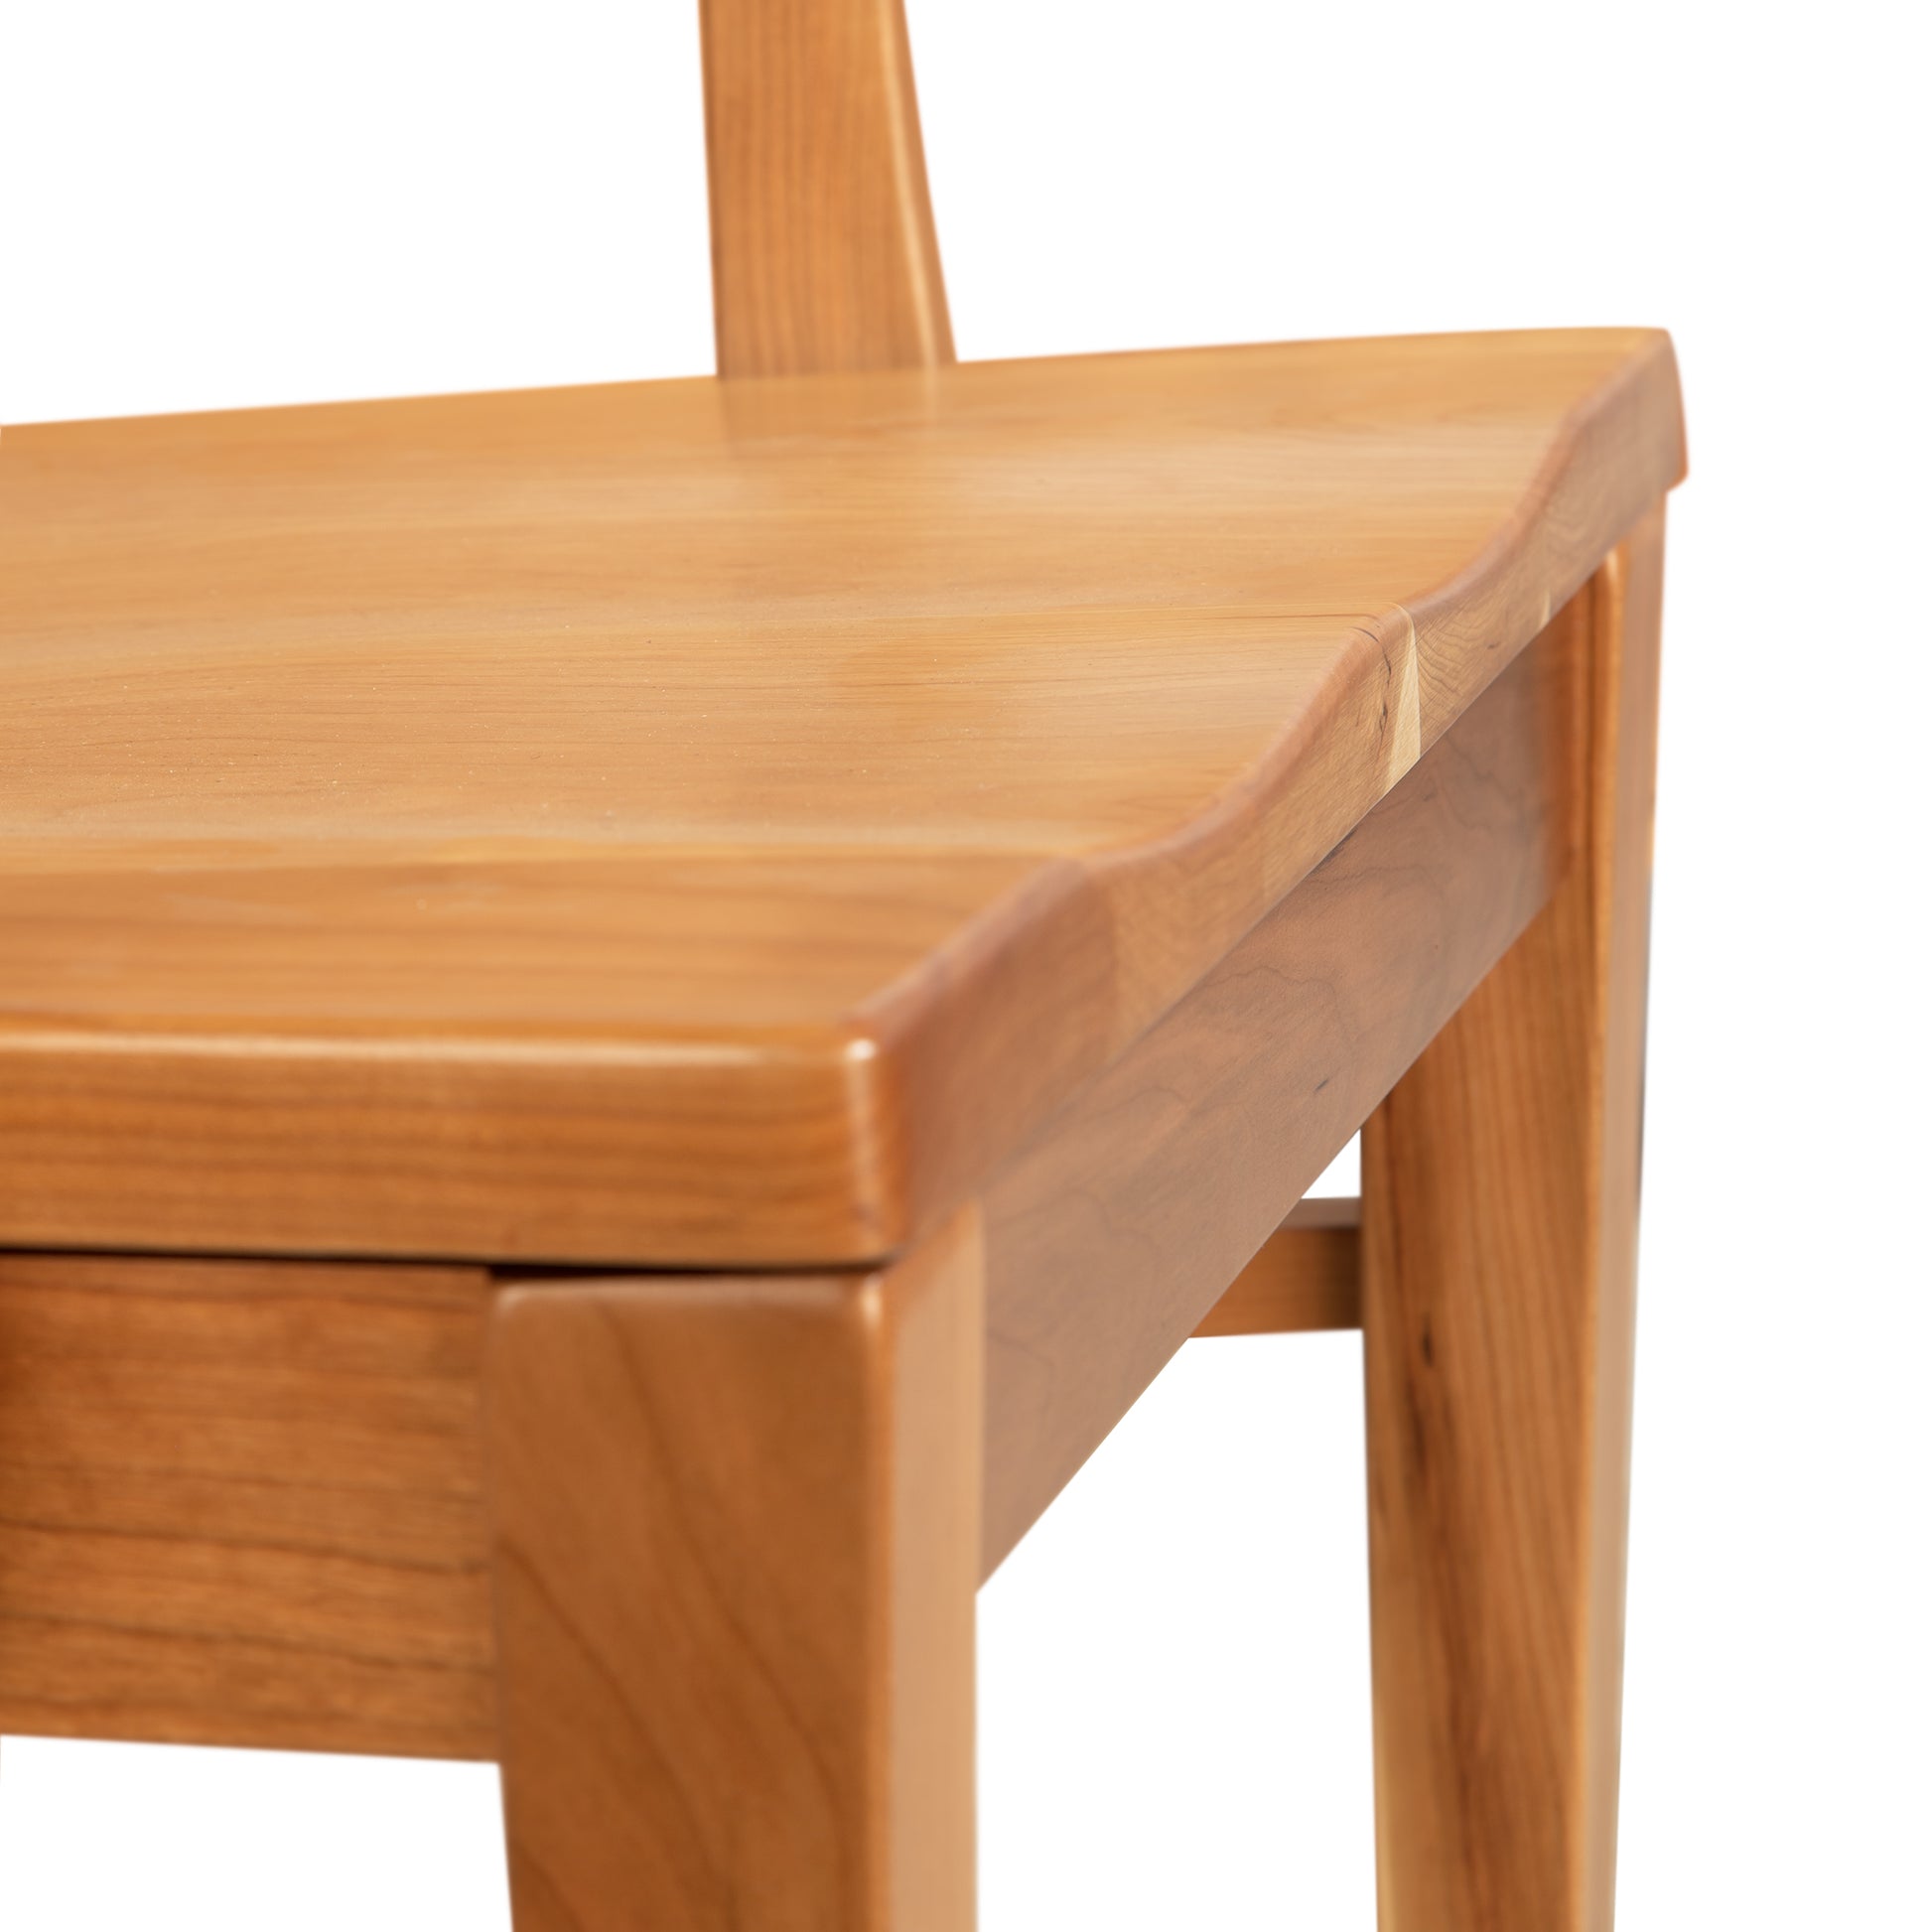 Close-up of a Vermont Woods Studios Contemporary Shaker Chair with Wood Seat, focusing on its scooped seat and part of the backrest, showing details of the wood grain and finish against a white background.